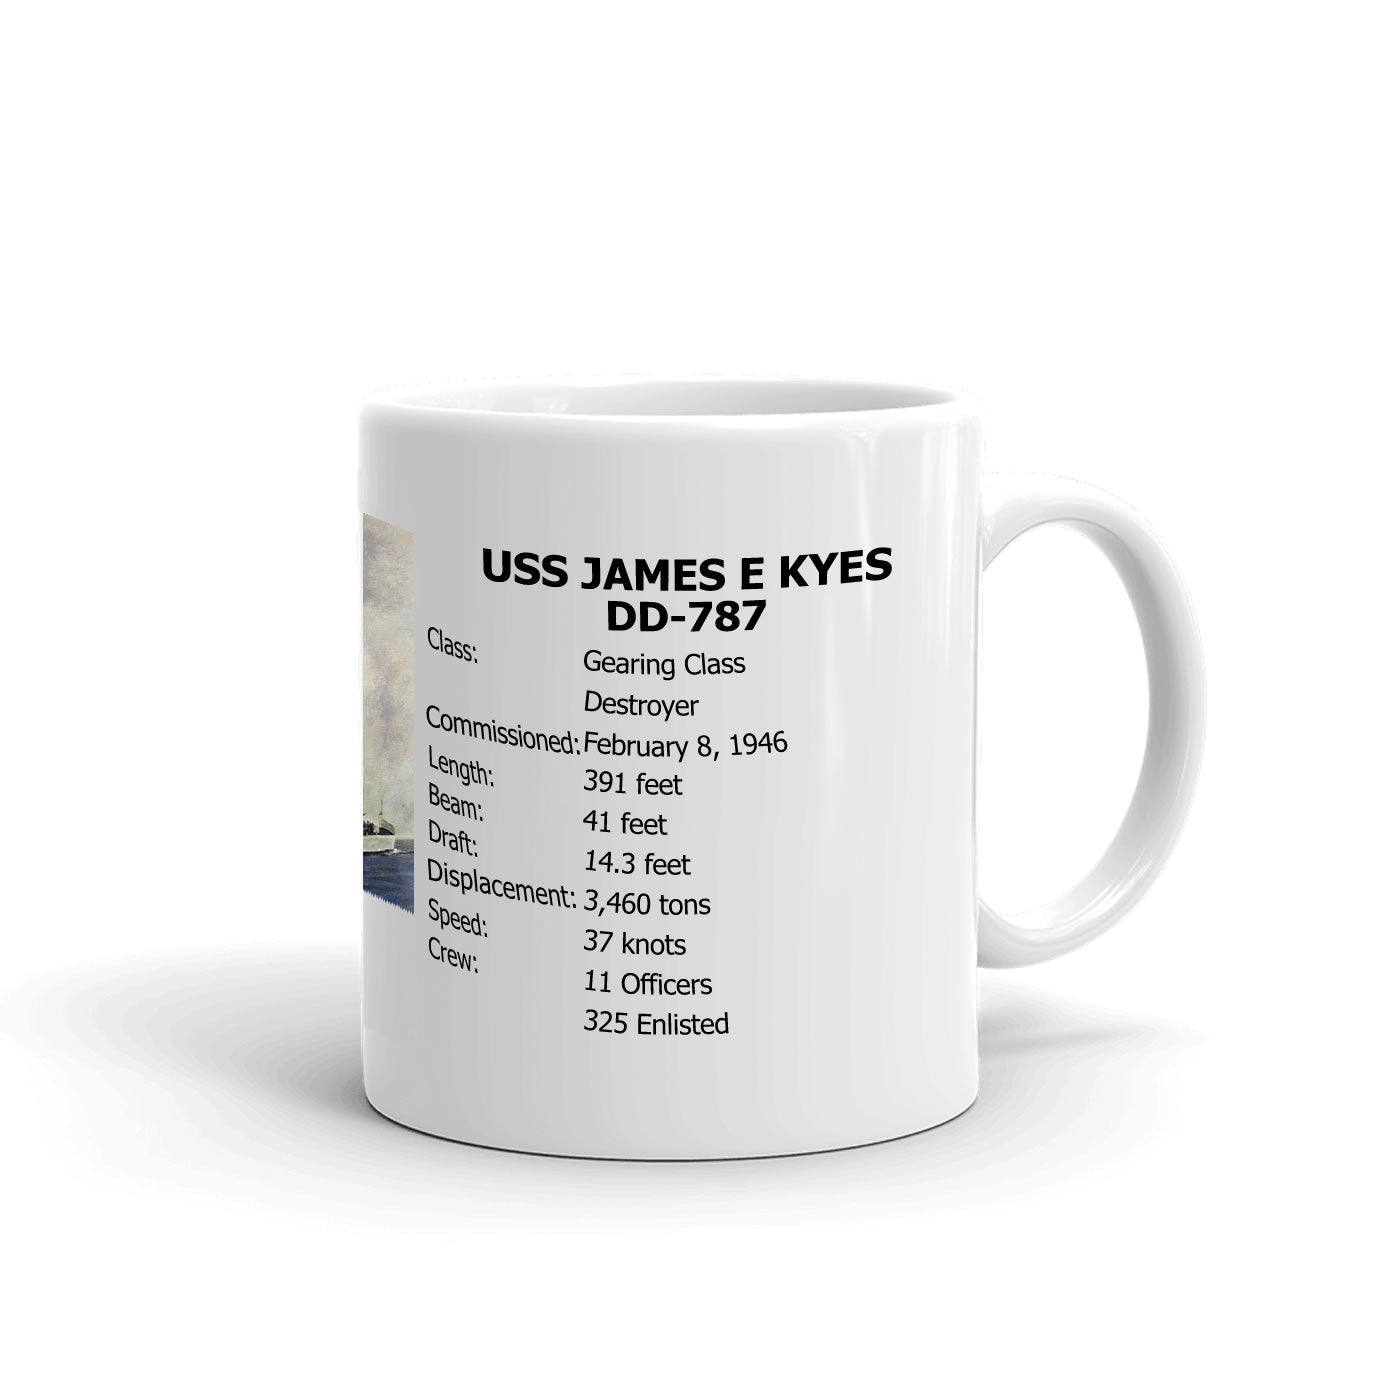 USS James E Kyes DD-787 Coffee Cup Mug Right Handle